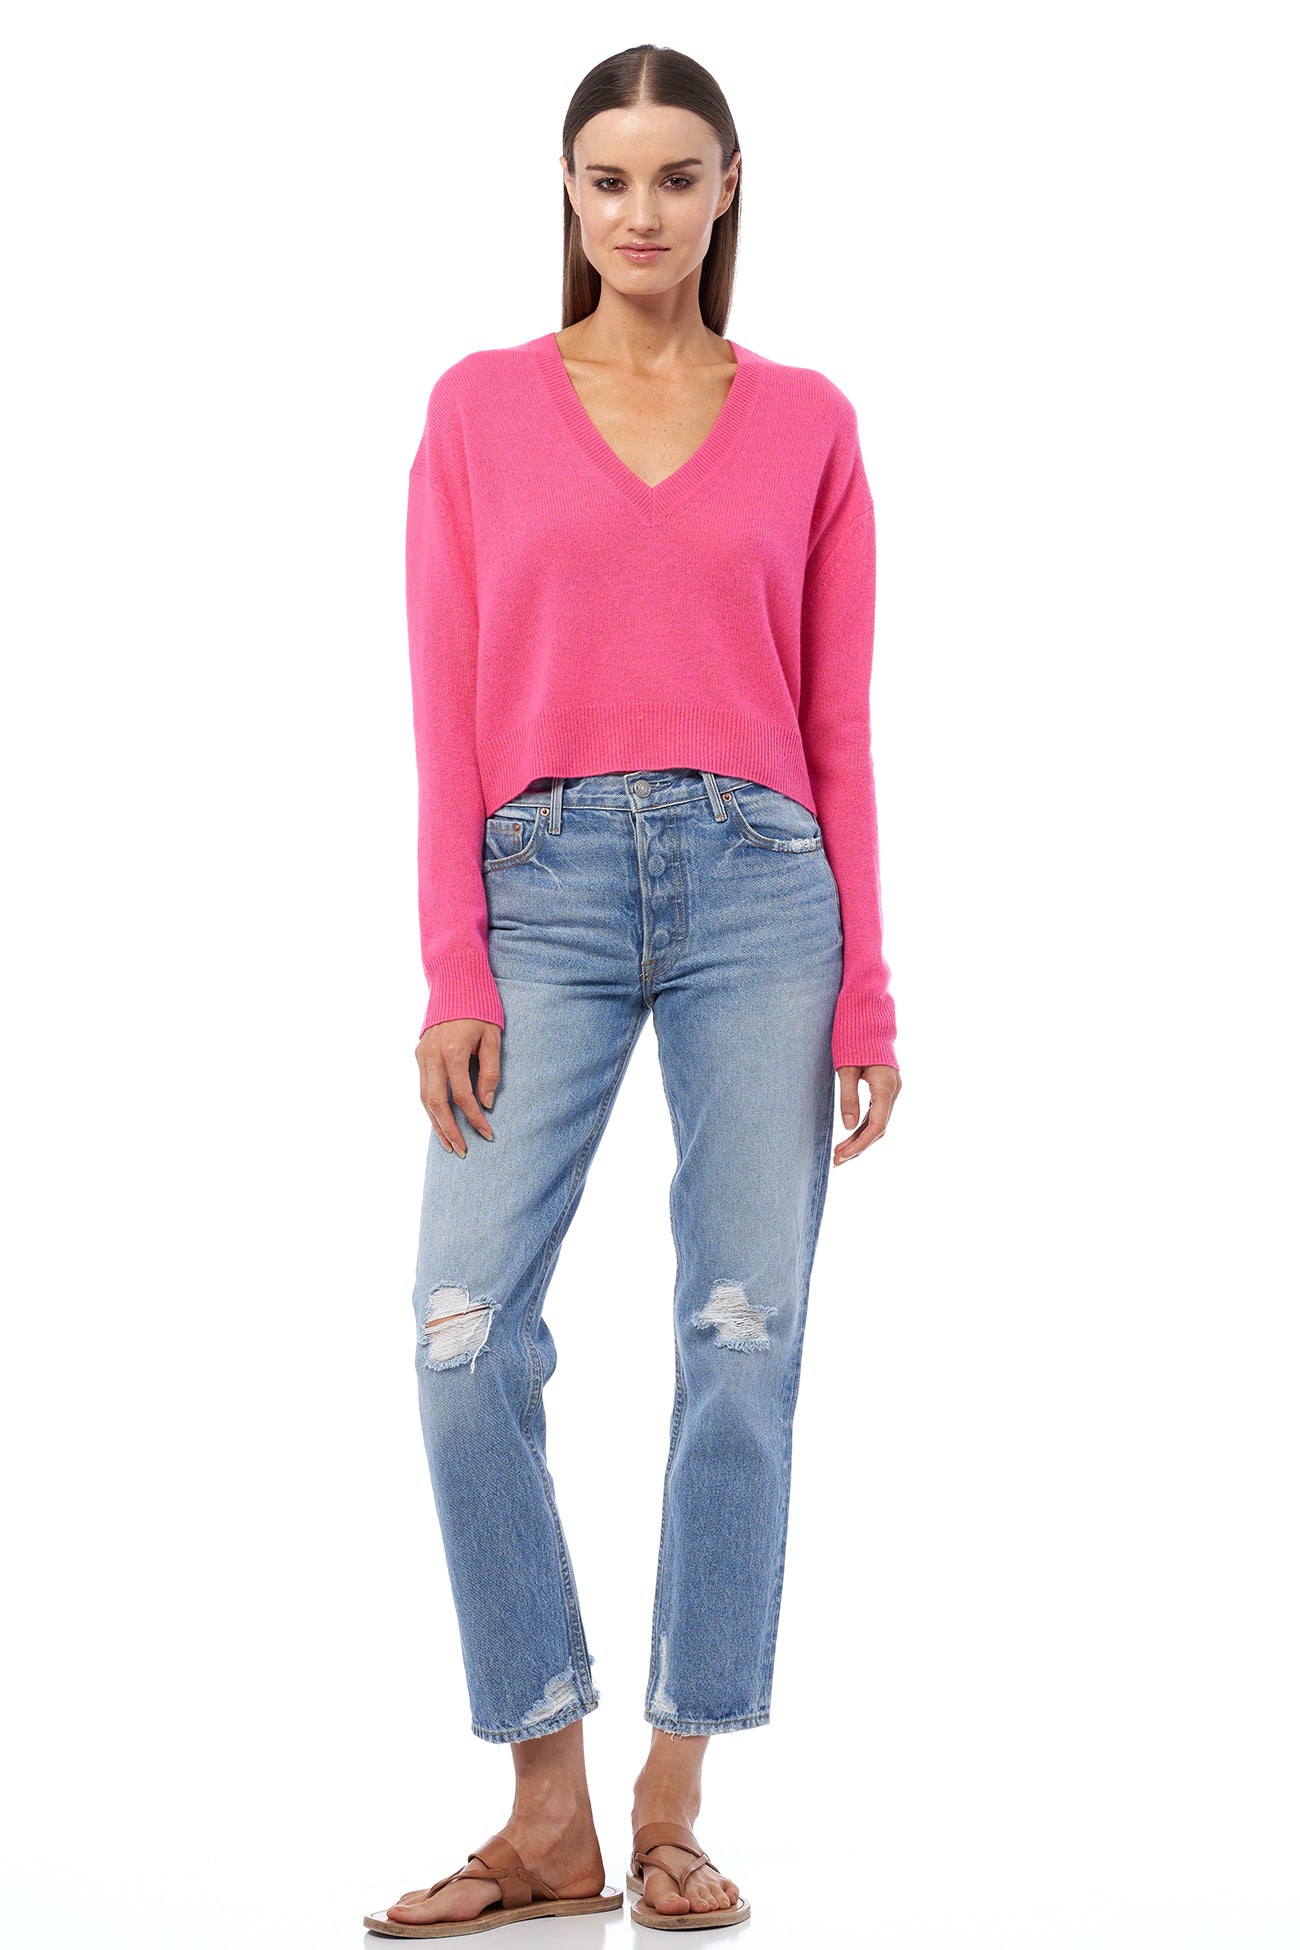 360 CASHMERE MARCY V-NECK CASHMERE SWEATER IN HISBISCUS